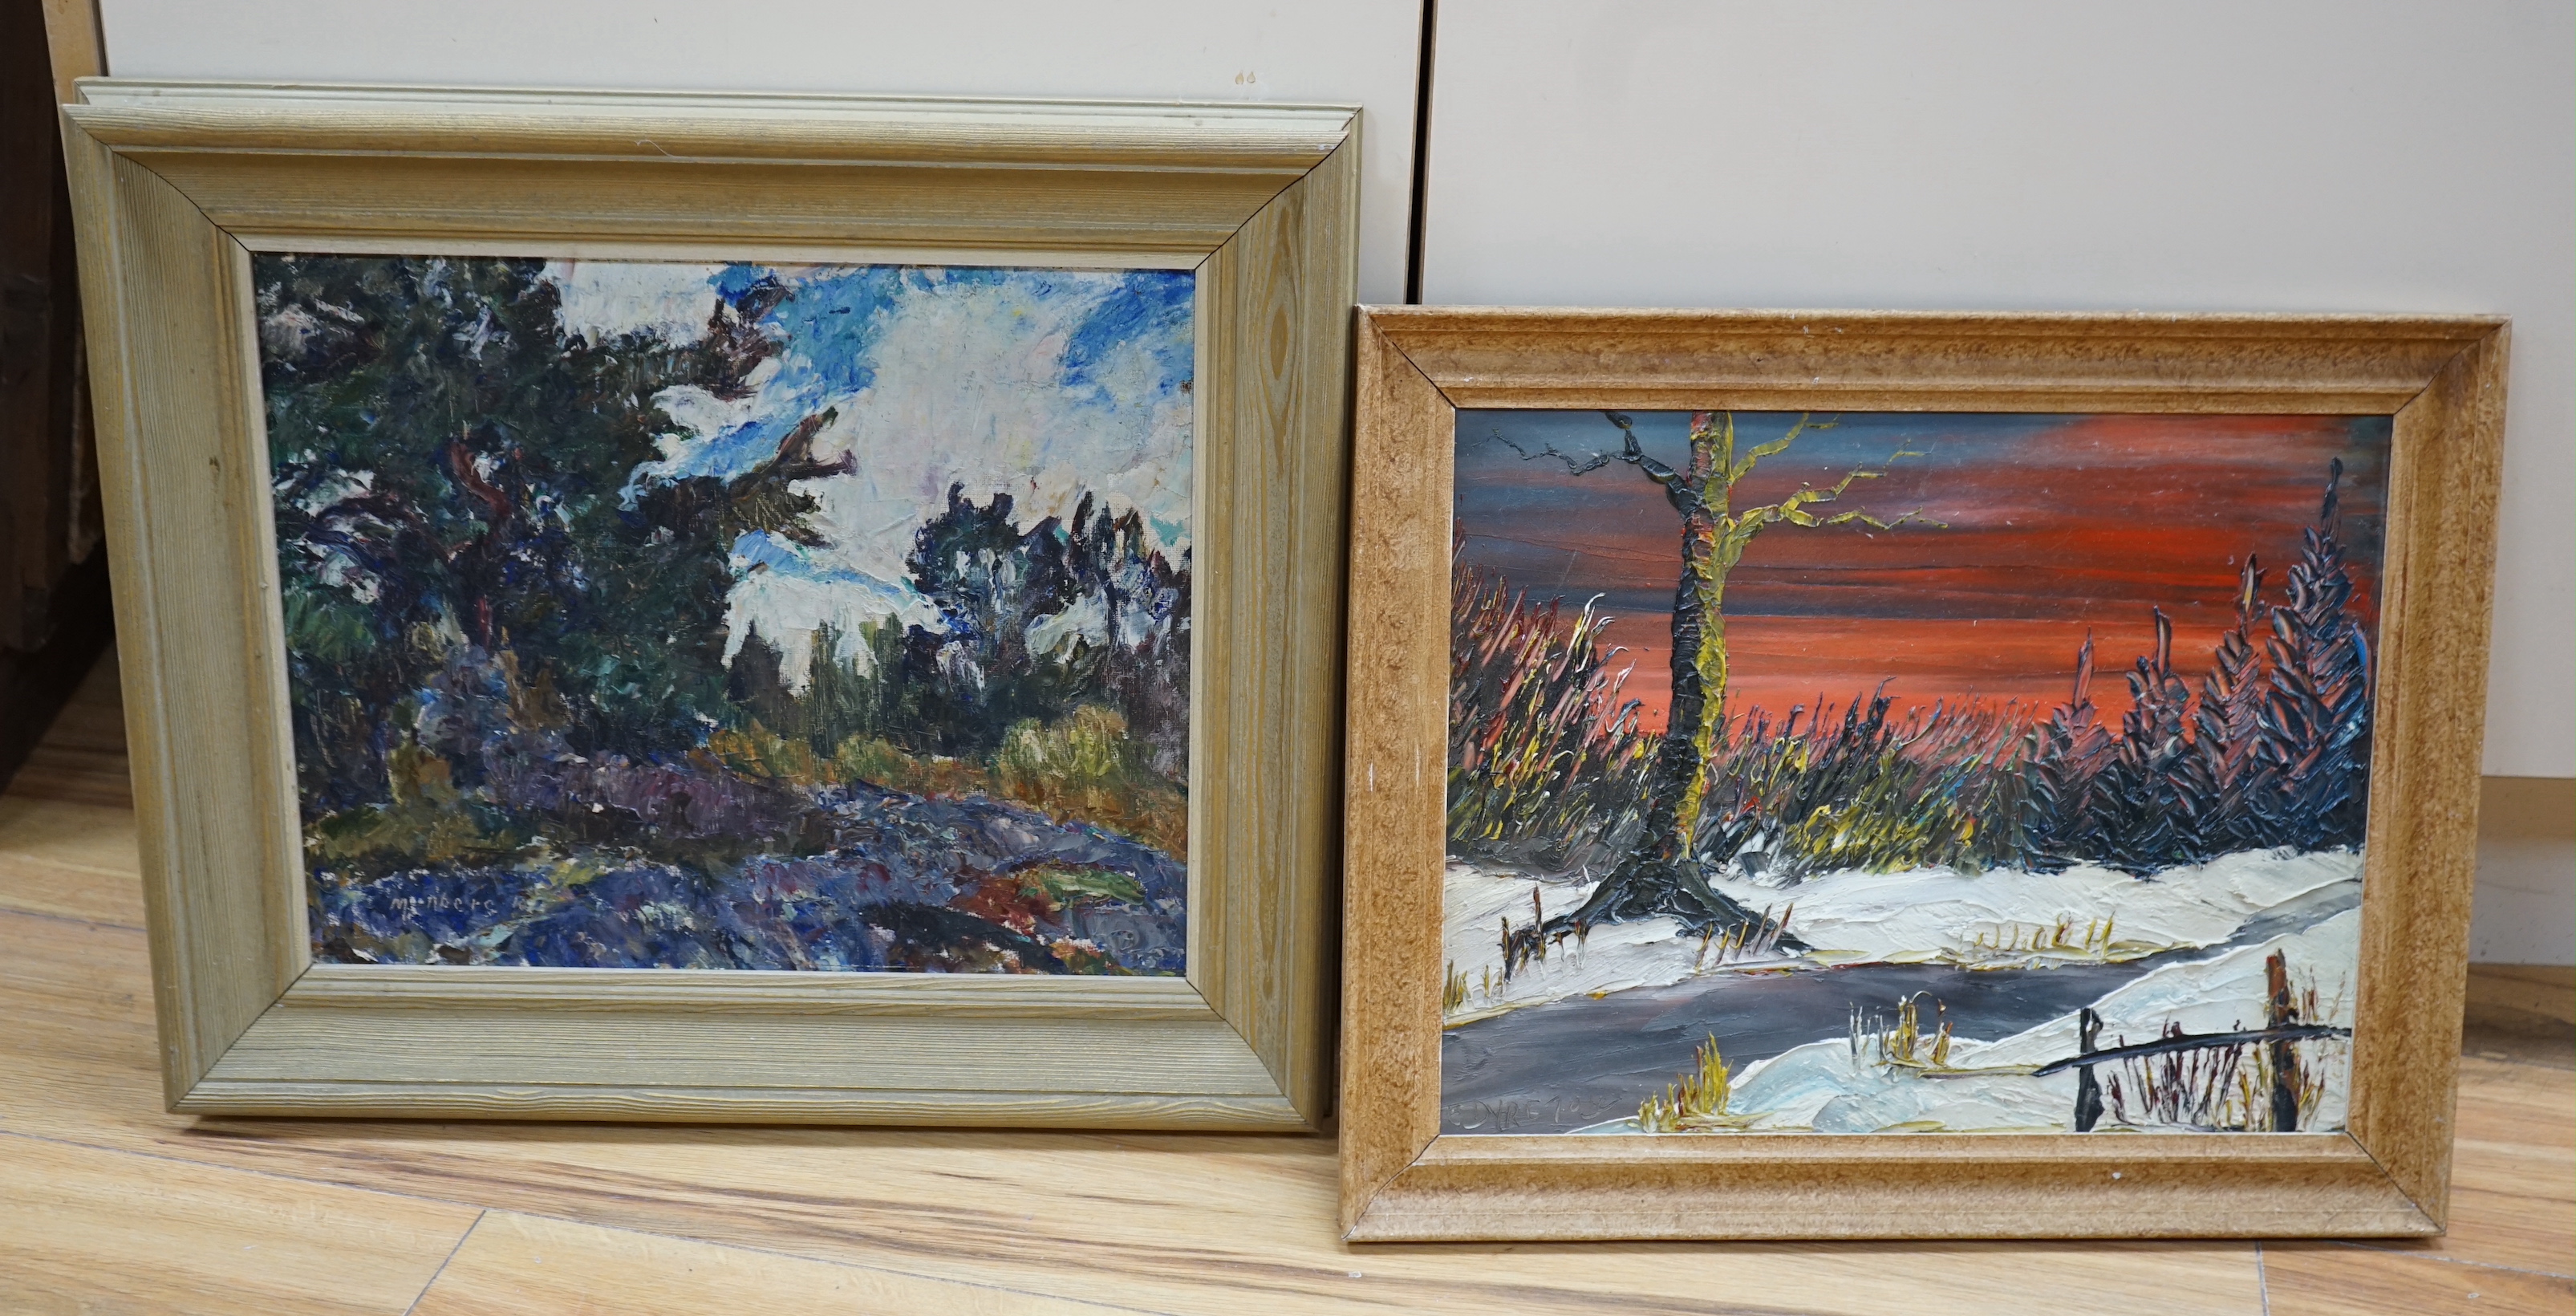 Two Impasto oils, one on canvas, Landscapes, each indistinctly signed, largest 29 x 37cm